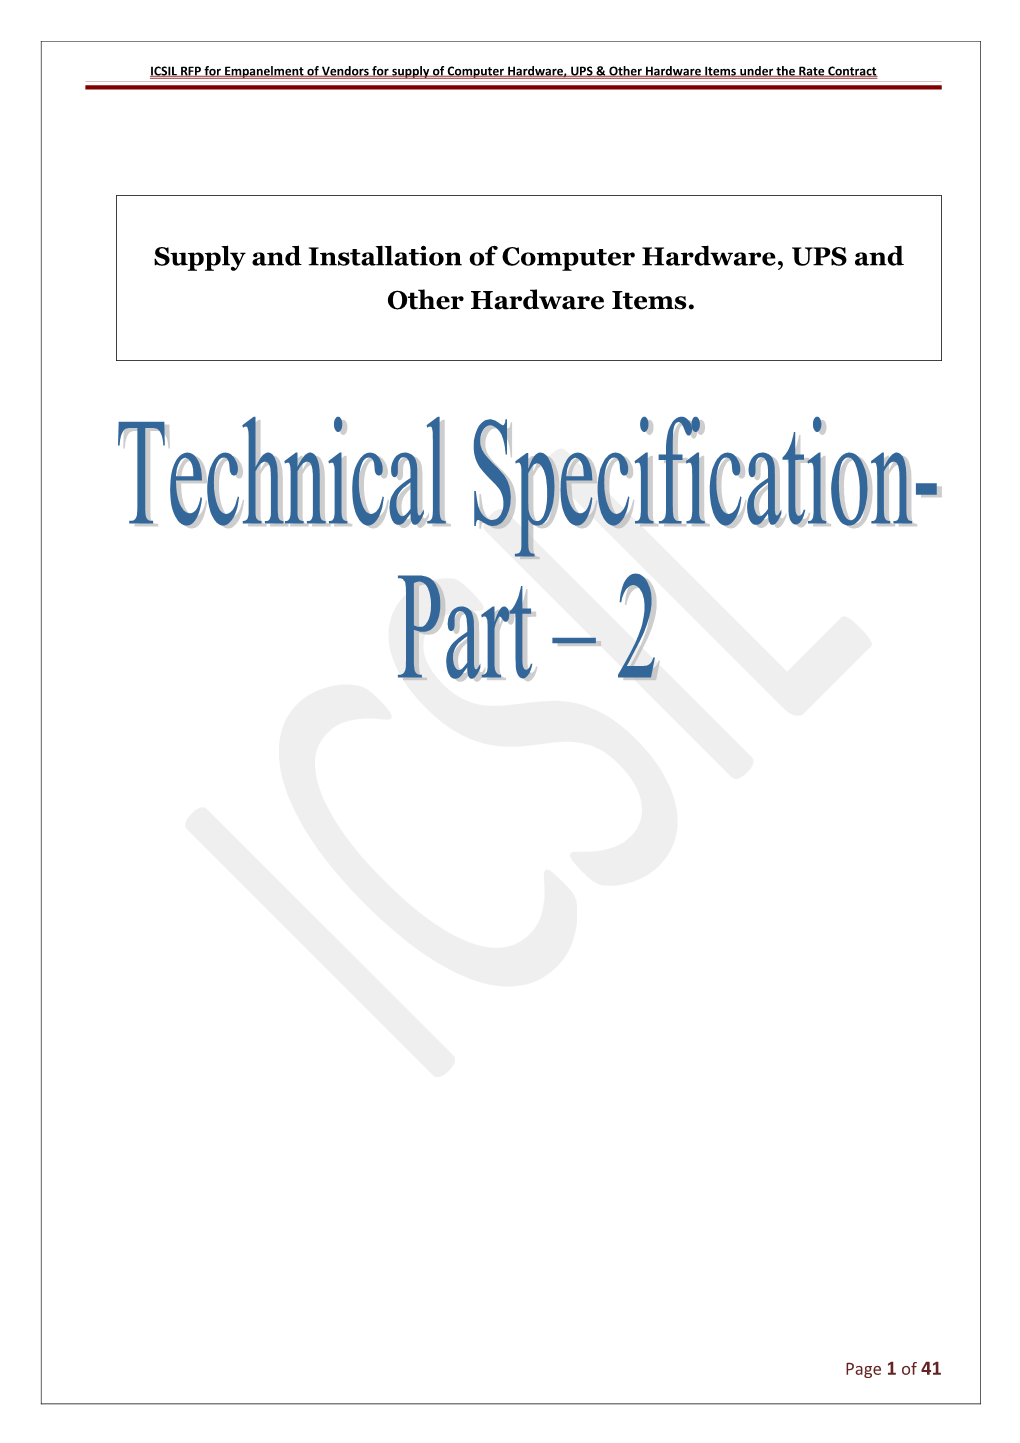 Supply and Installation of Computer Hardware, UPS and Other Hardware Items